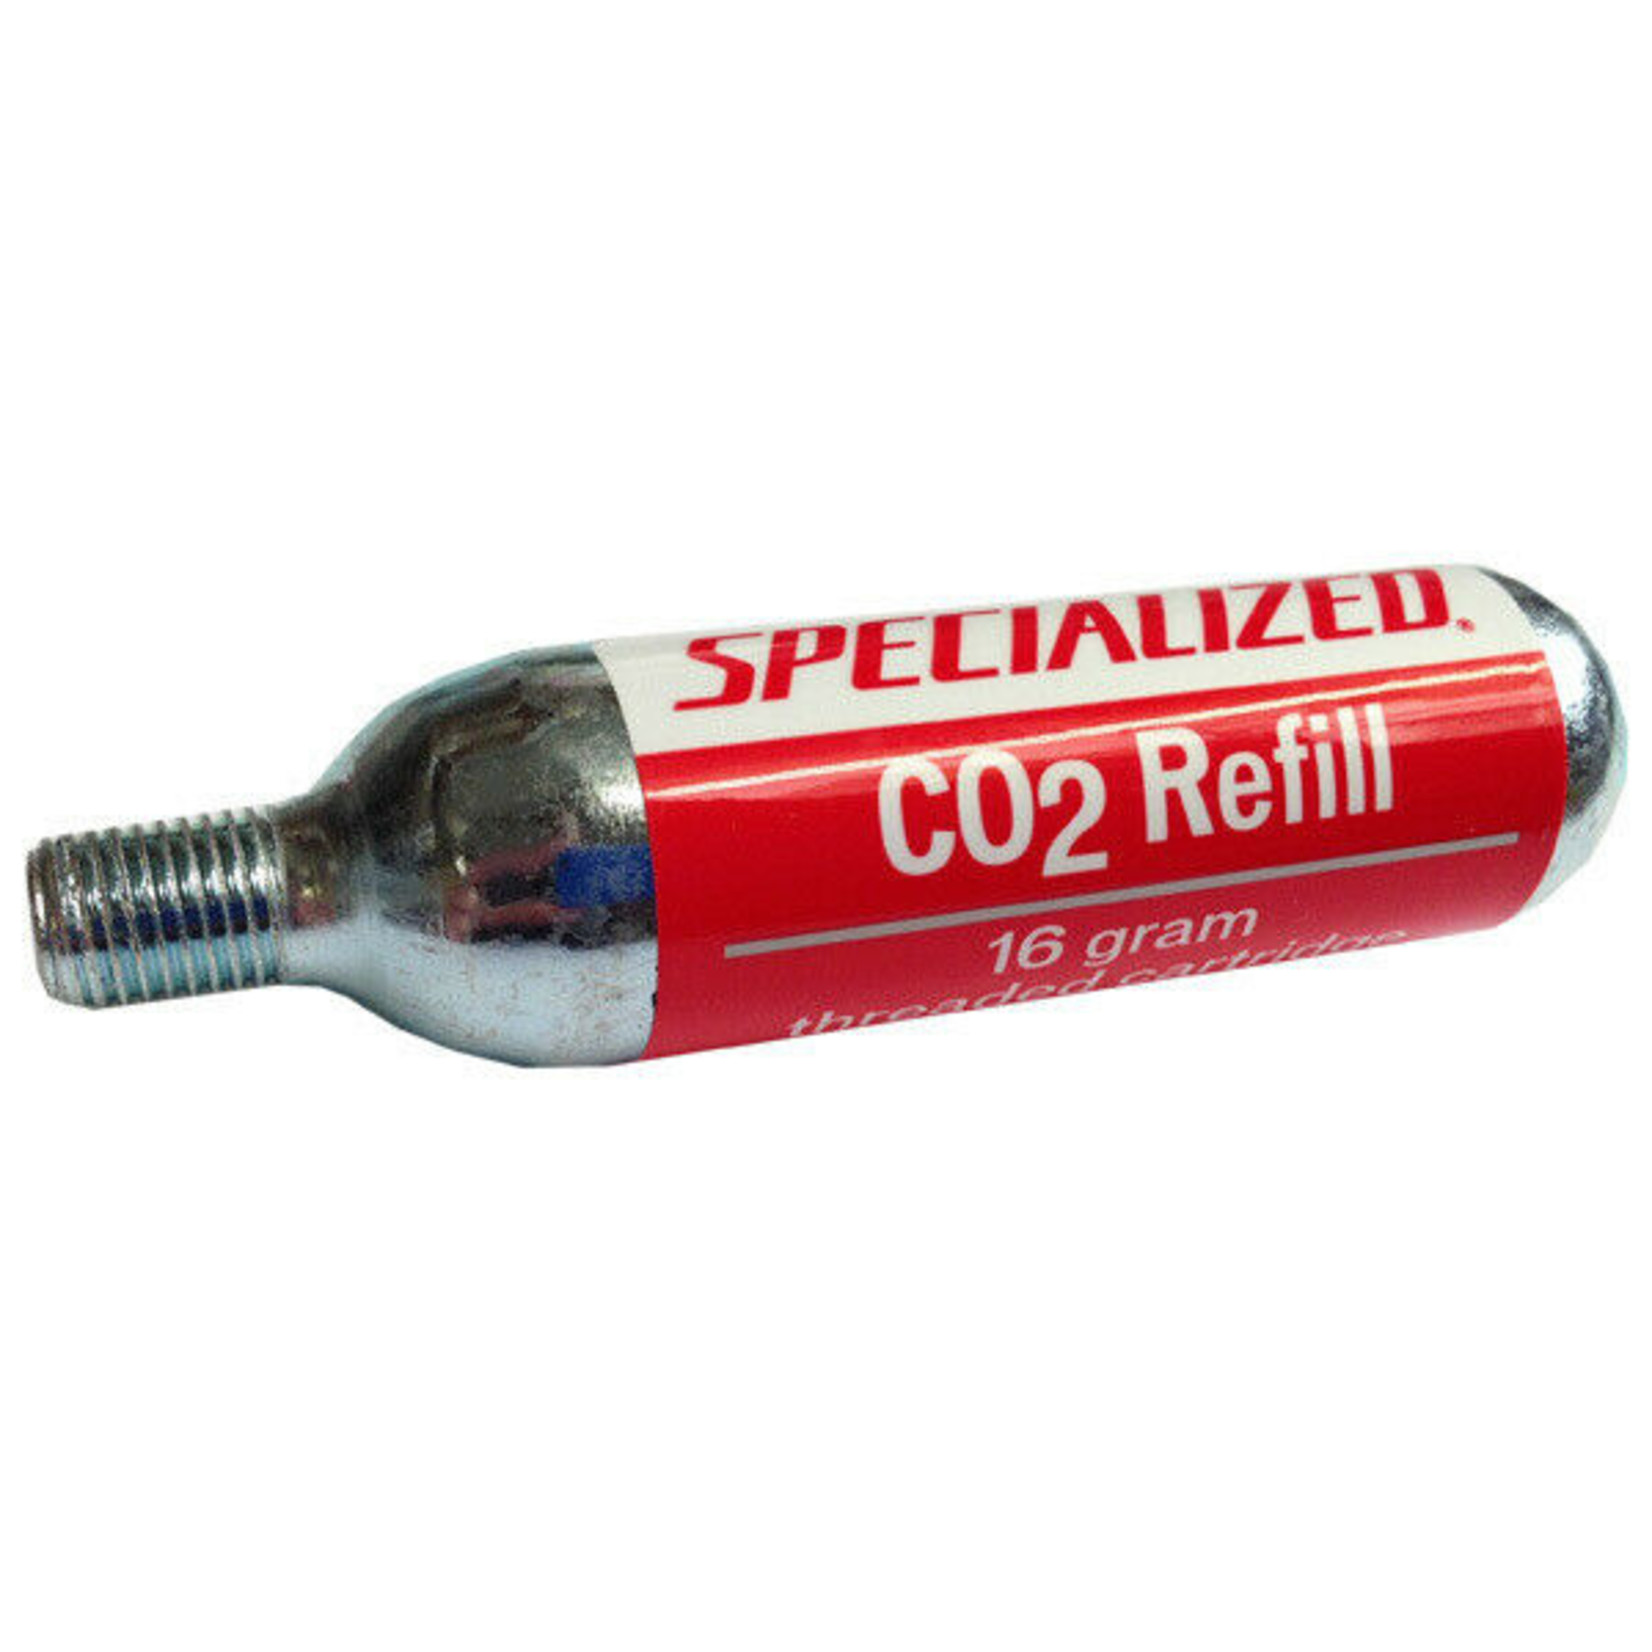 Specialized Specialized CO2 Threaded Refill Cartridge 16g